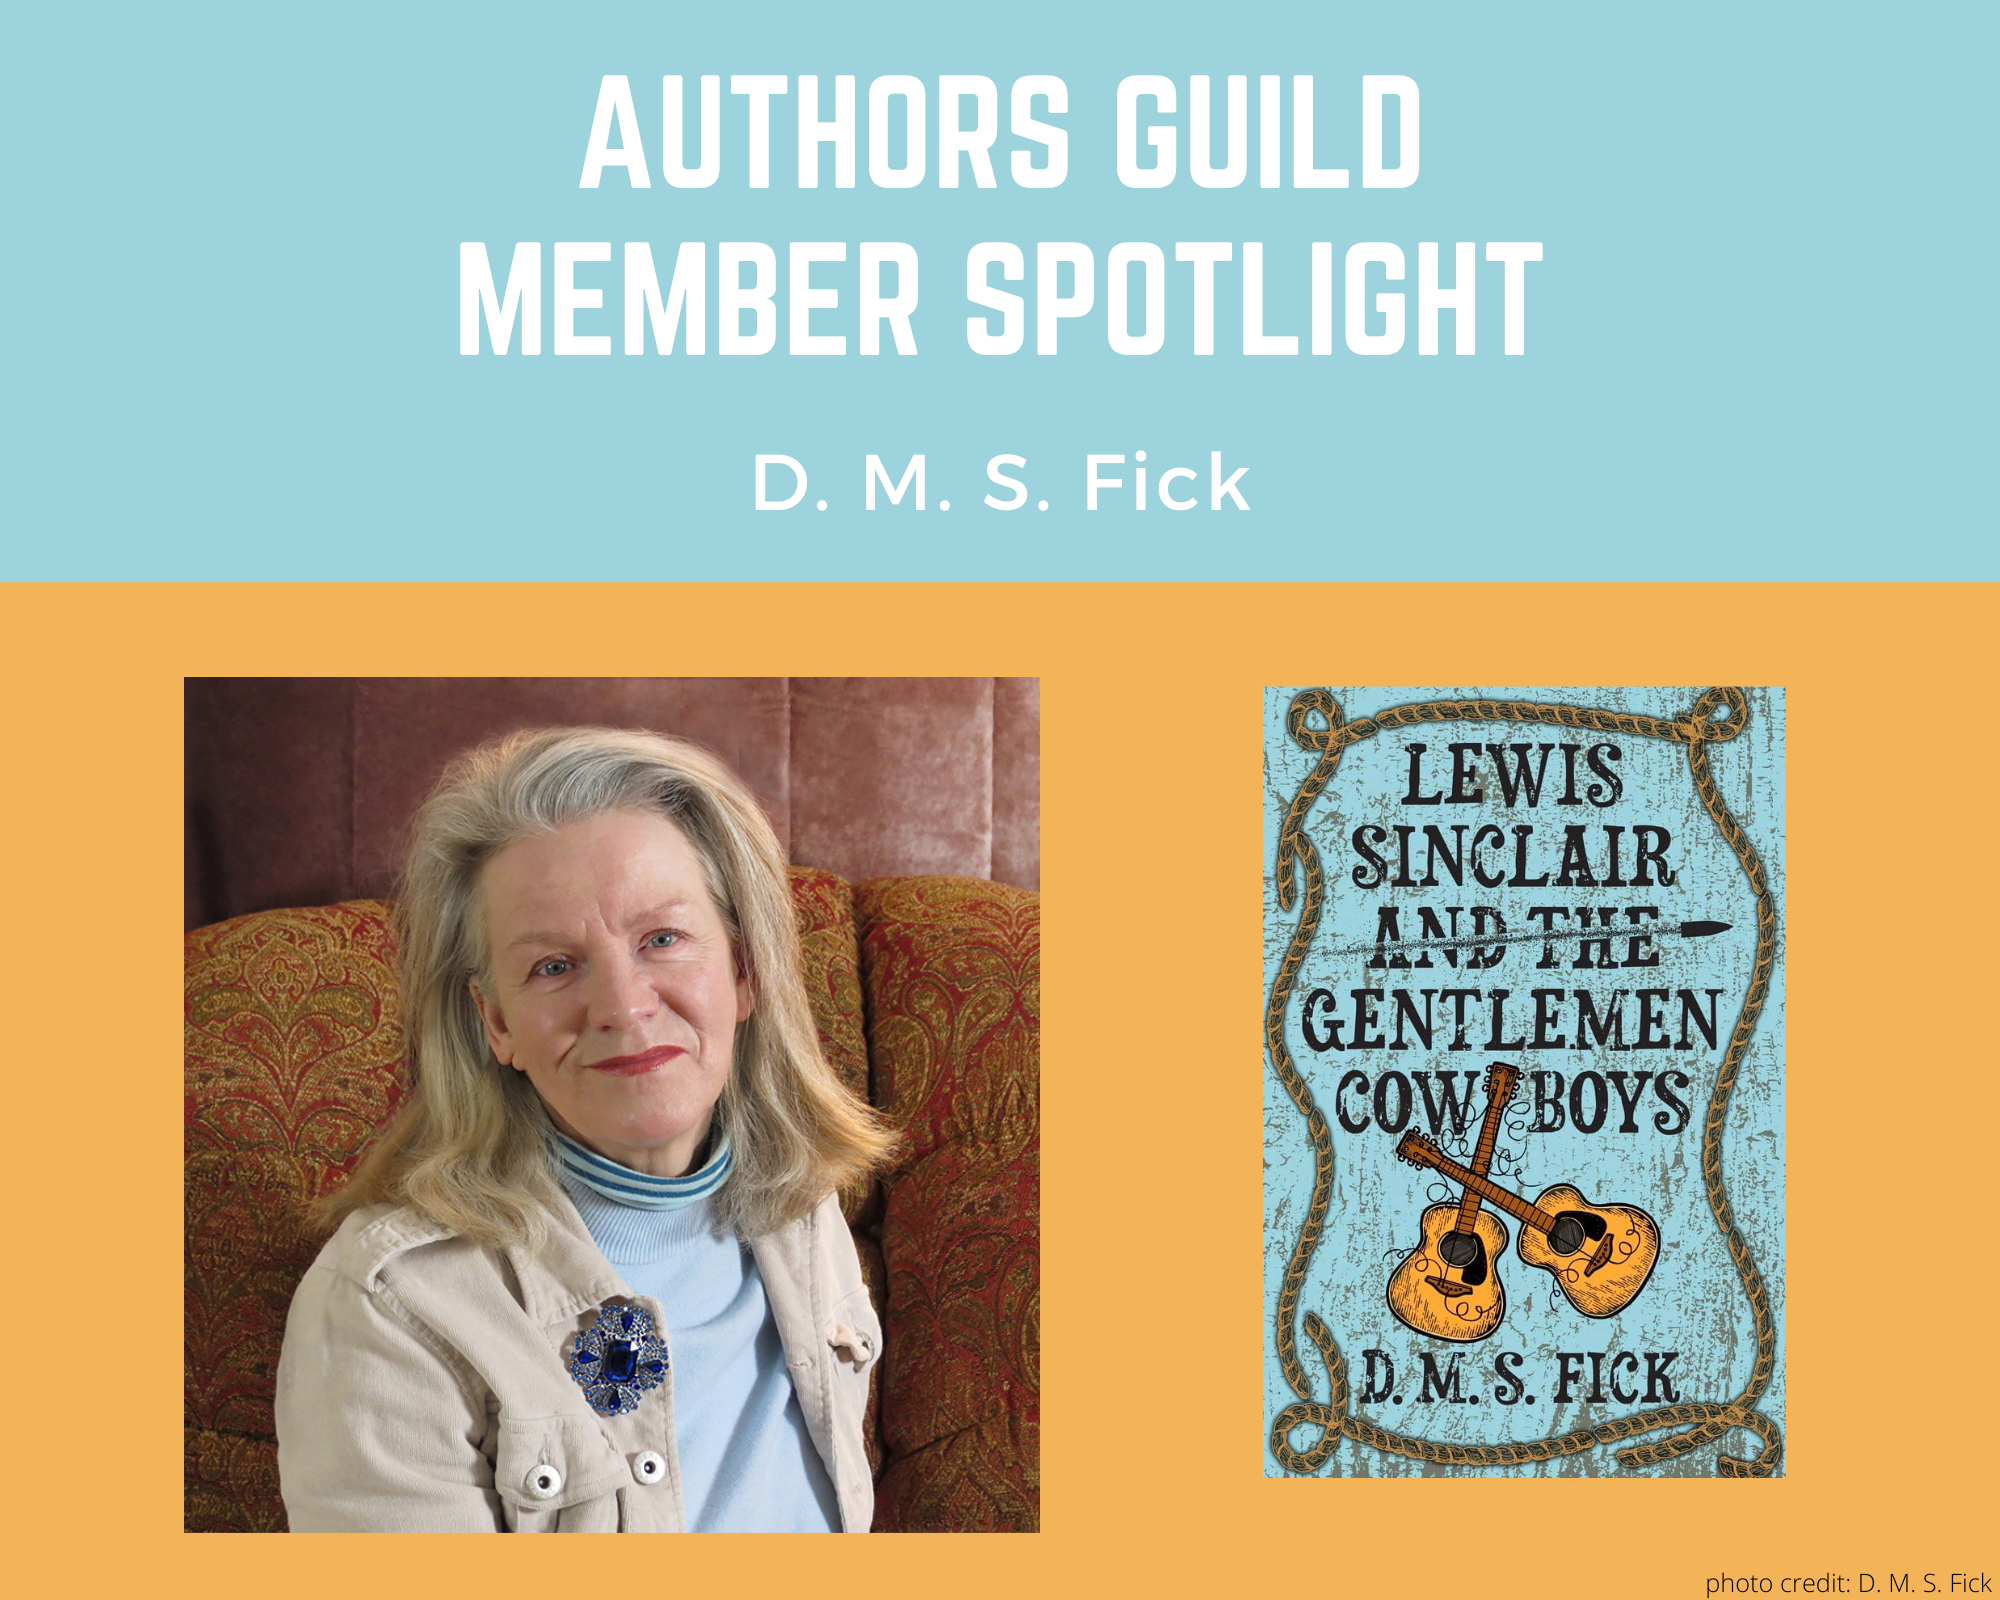 author D.M.S. Fick and an image of her book Lewis Sinclair and the Gentlemen Cowboys